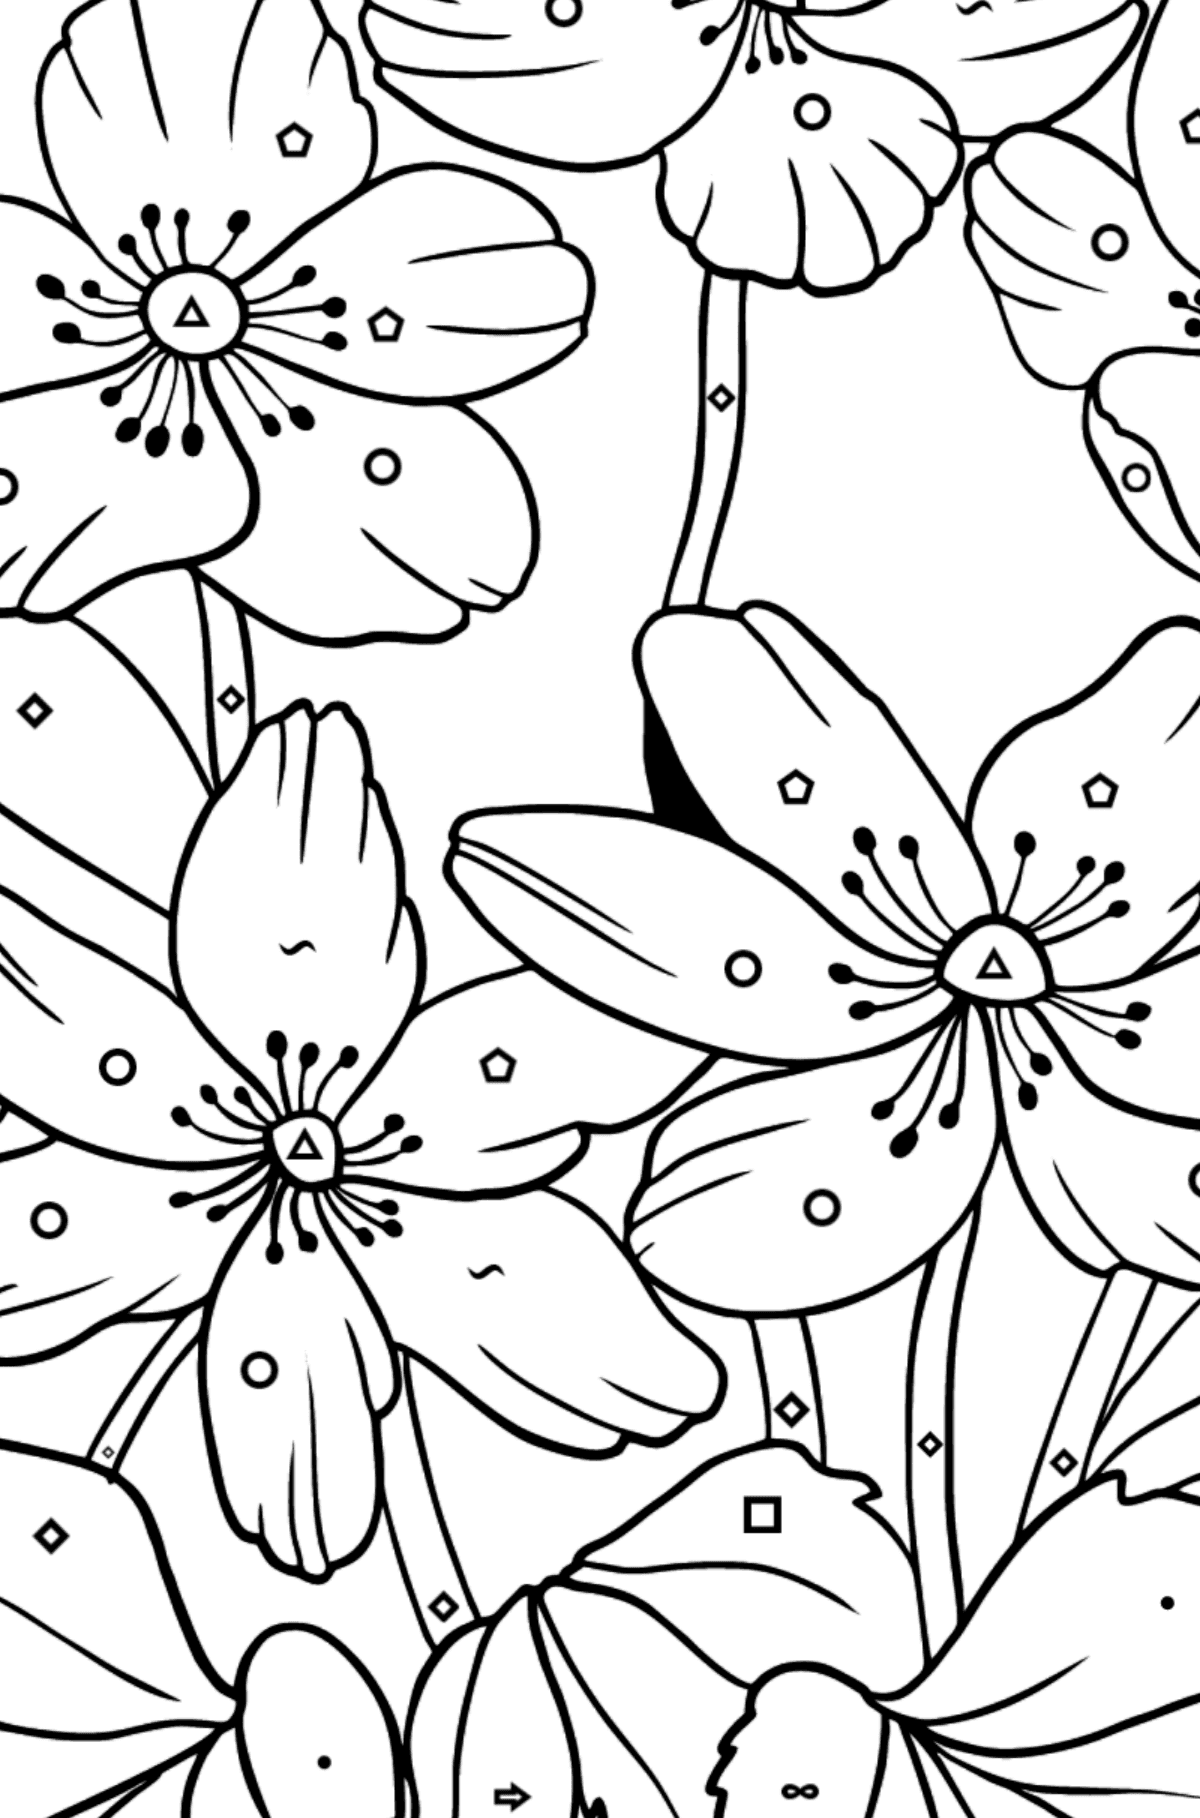 Flower Coloring Page - A Windflower with Yellow Petals - Coloring by Symbols and Geometric Shapes for Kids